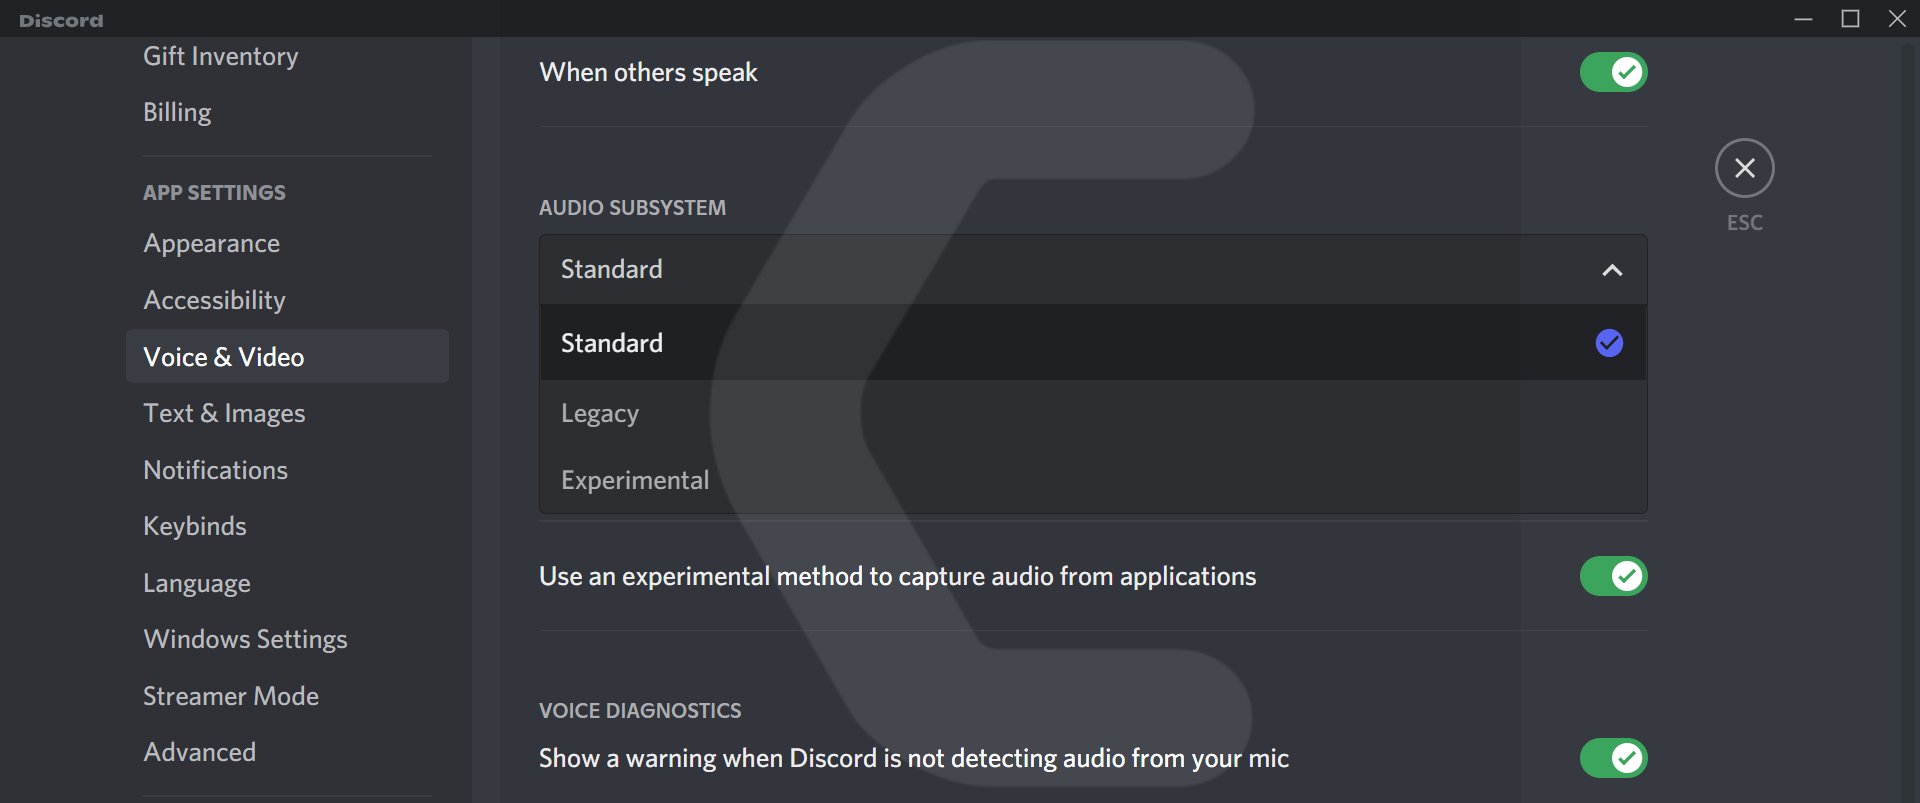 How To Fix Discord Echo On Windows 11/macOS/Mobile?